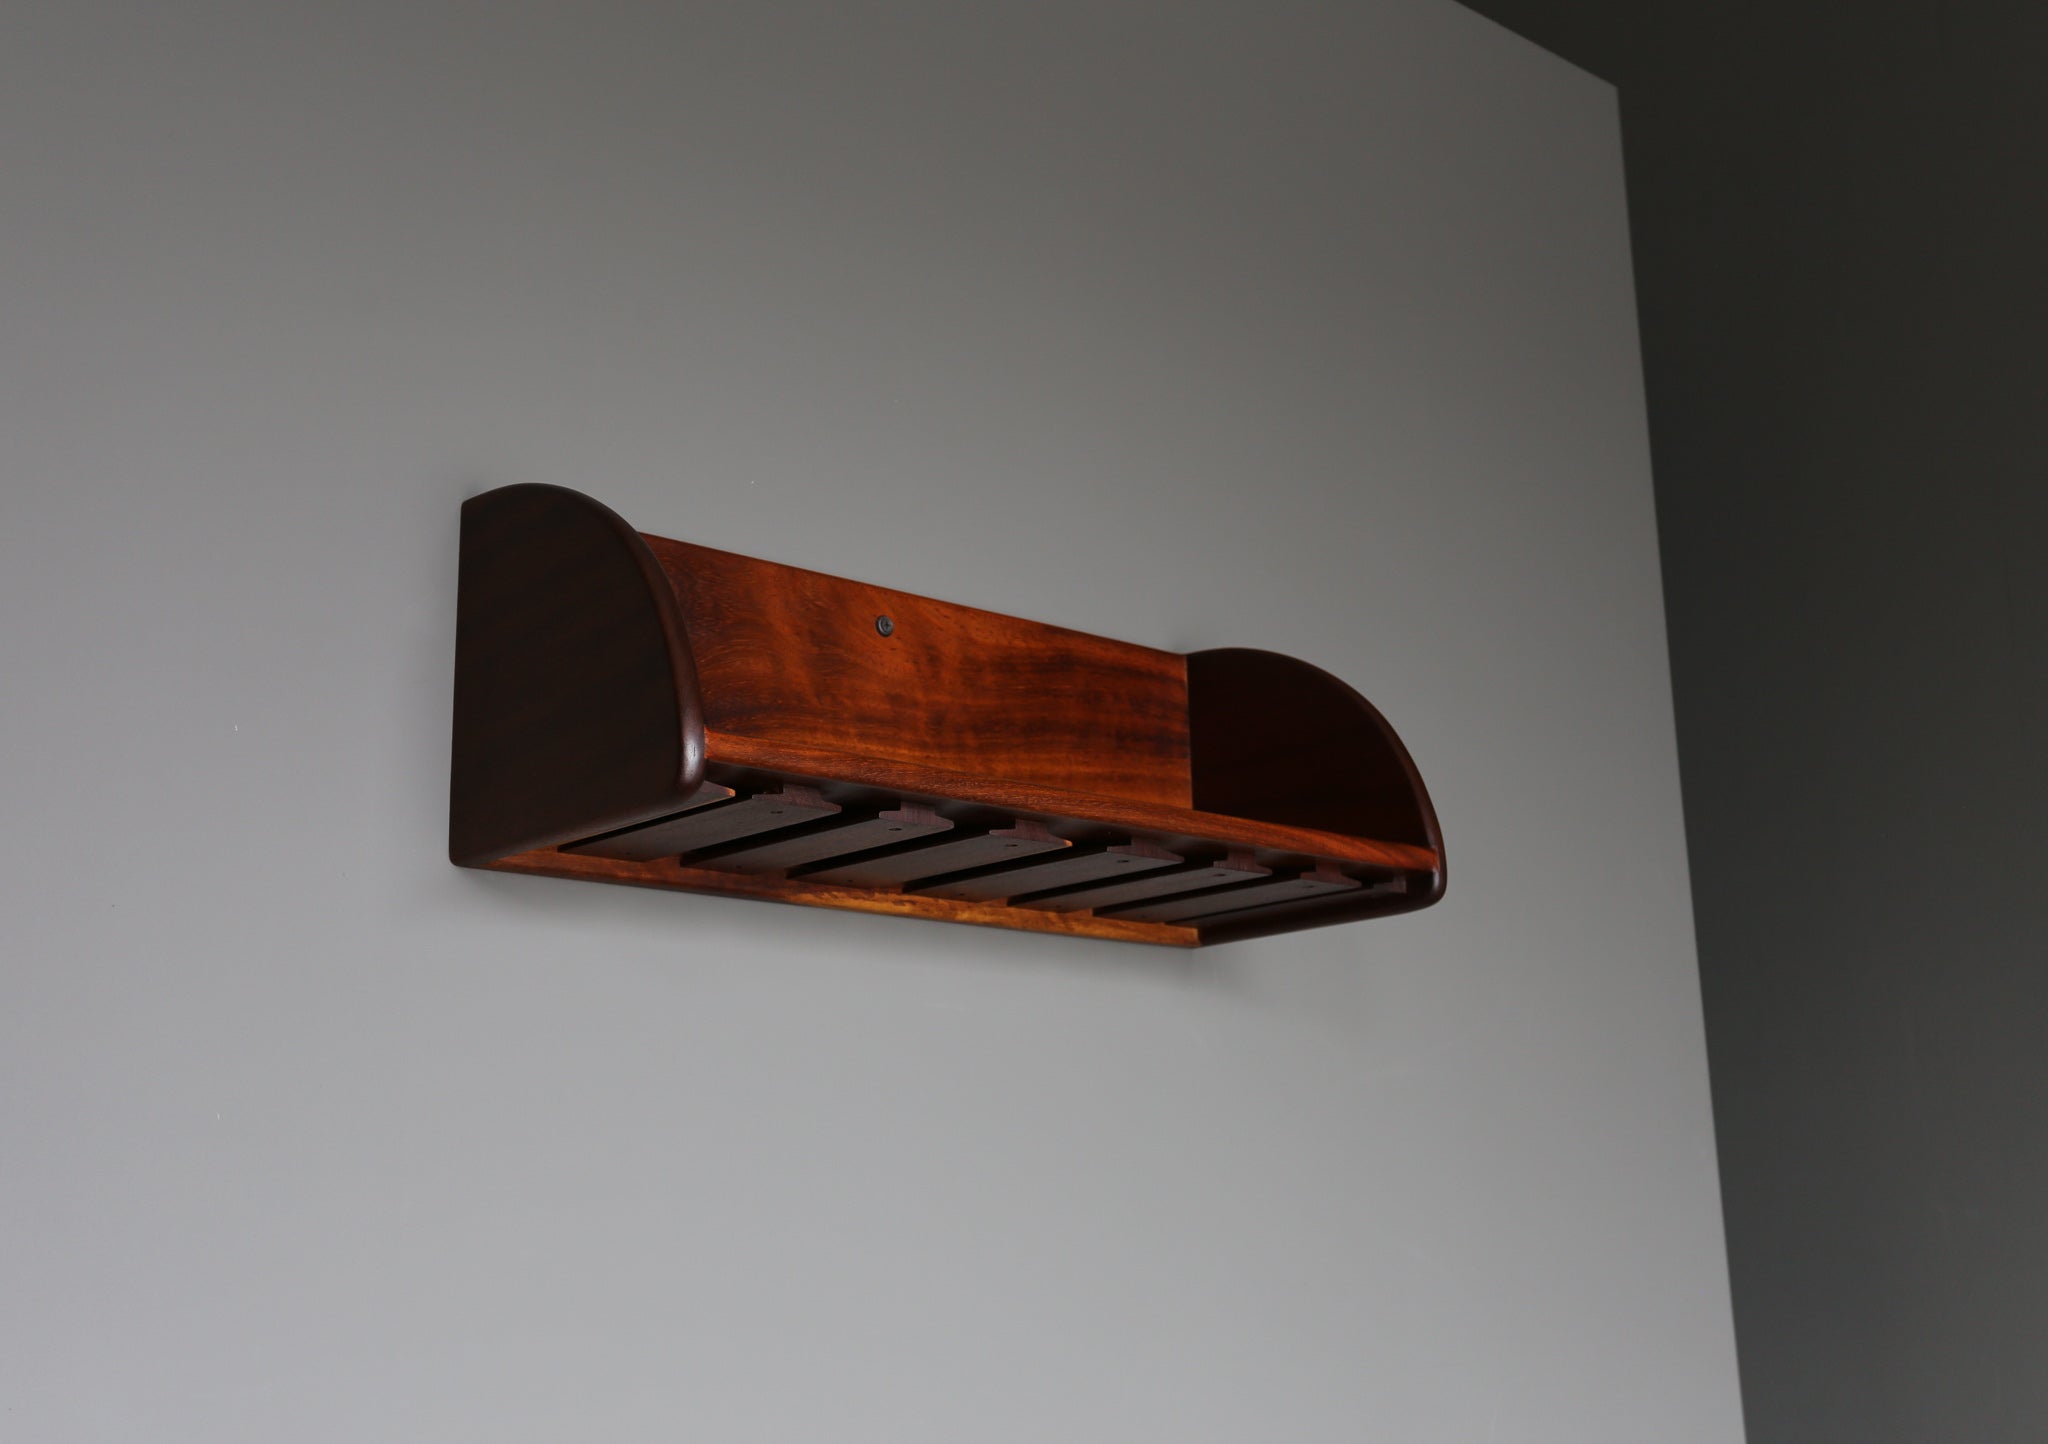 = SOLD = Robert Trout Handcrafted Solid Walnut Floating Shelf, circa 1968